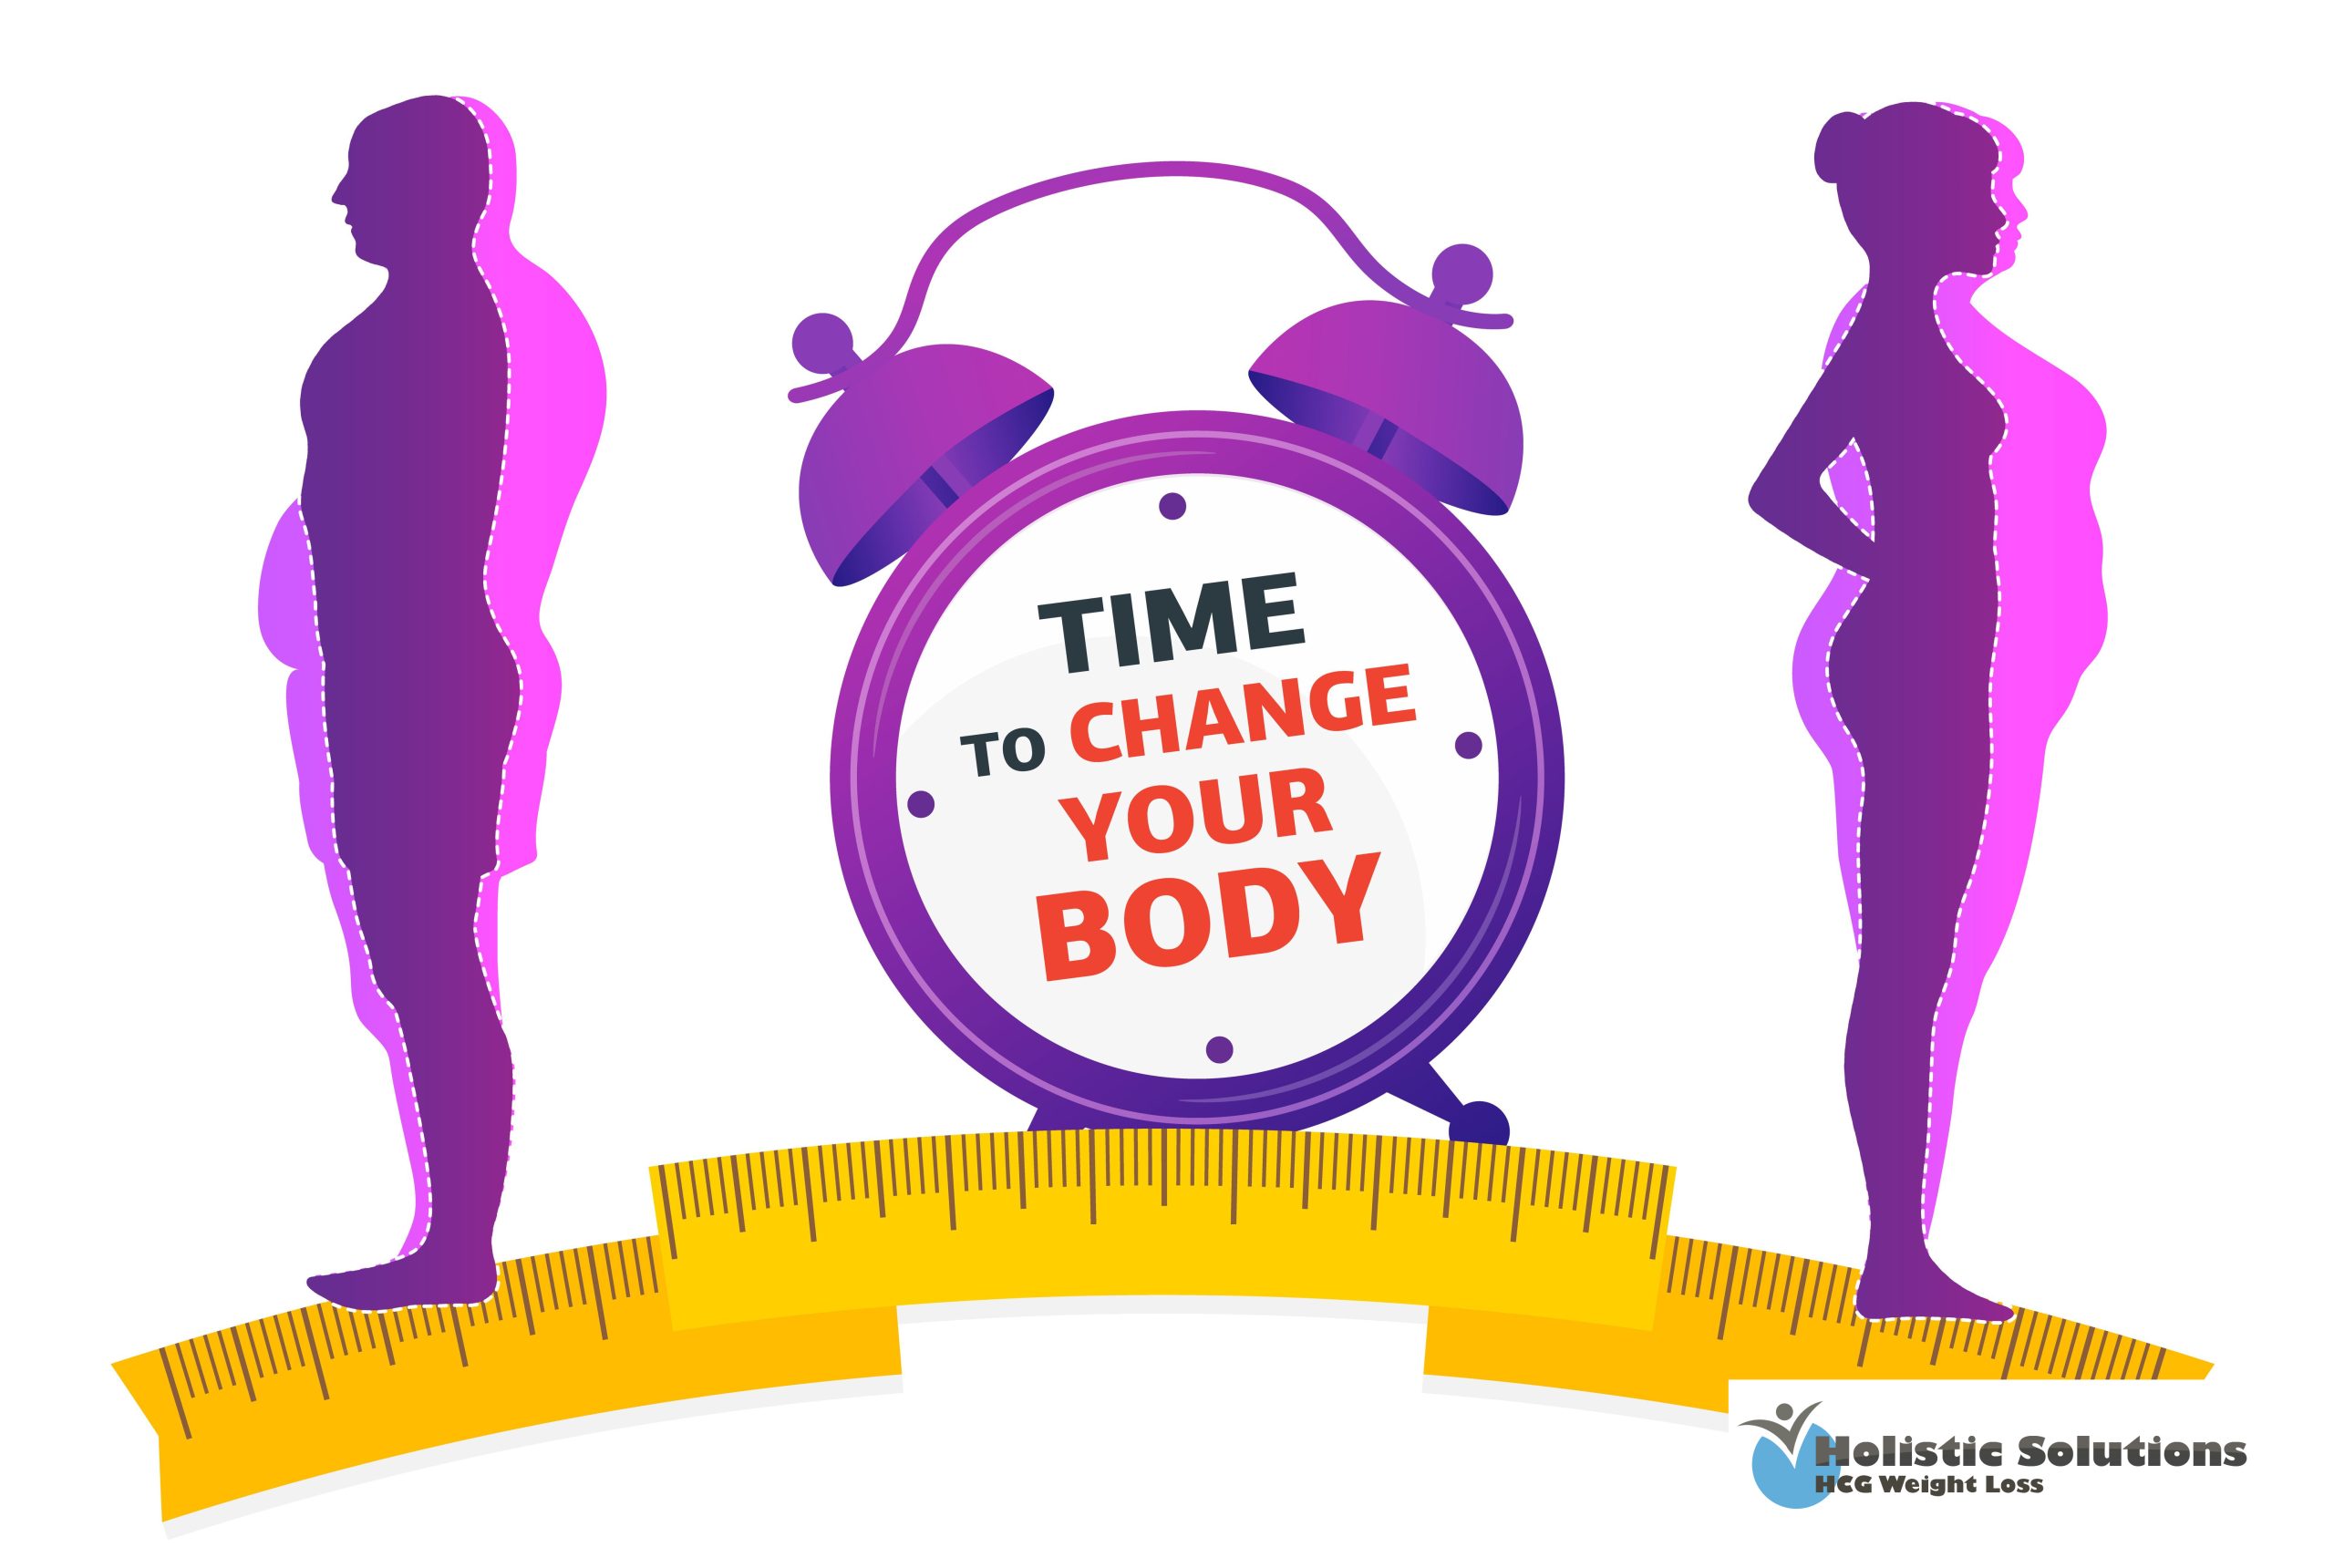 Make A Lifestyle Change With An Appointment At A Mission Viejo HCG Weight Loss Clinic